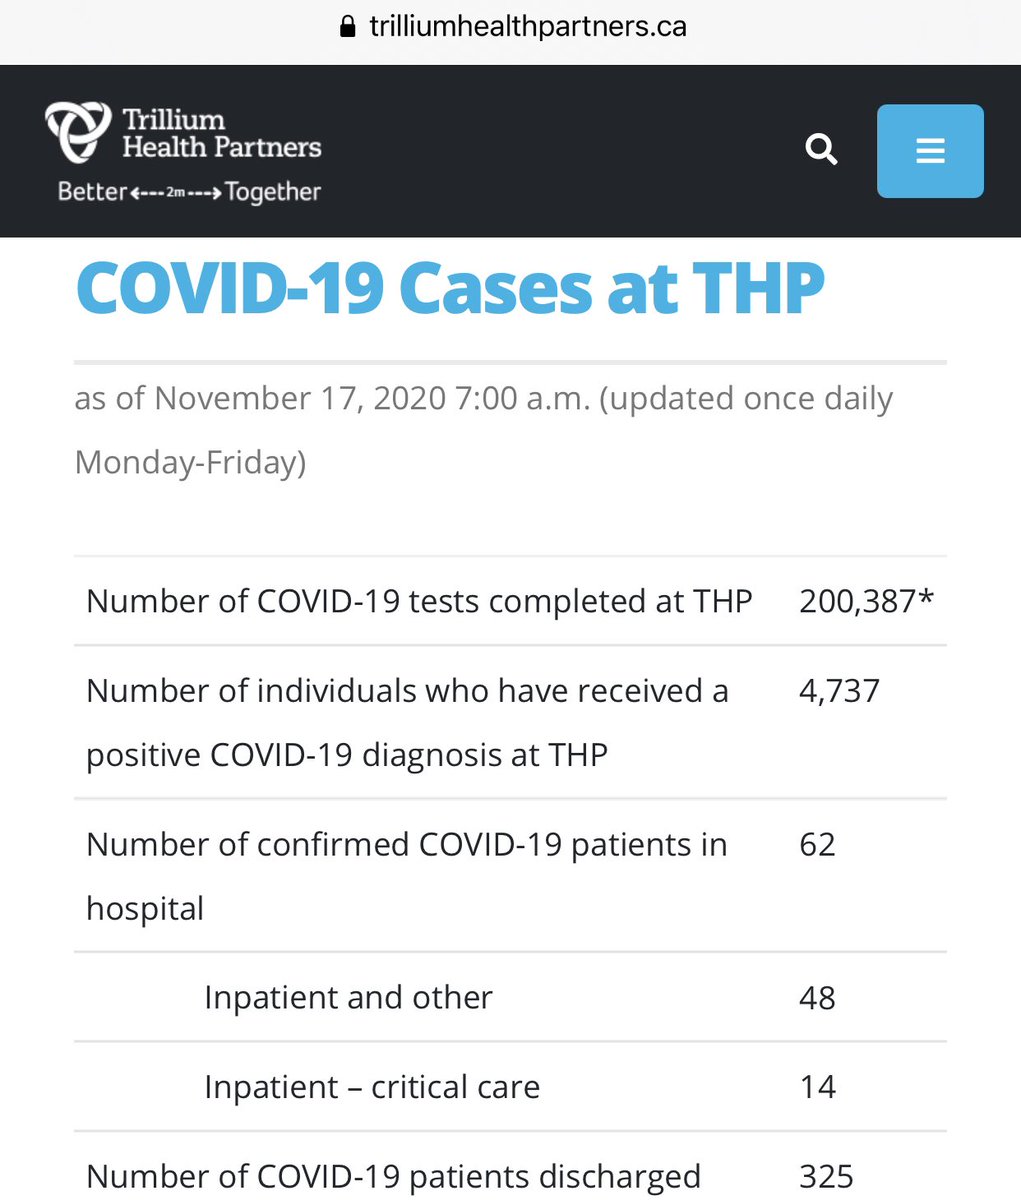 6/n 62 covid patients in 3 hospitals in Mississauga. Avg. of 20 patients/hospital. Trillium Health: (Credit Valley Hospital, Mississauga Hospital, & Queensway Health Centre)  #whereiscovid #COVID19  #Coronavirus  #lockdown  #pandemic  #science  #Canada  #COVID19ontario  #data  #onpoli